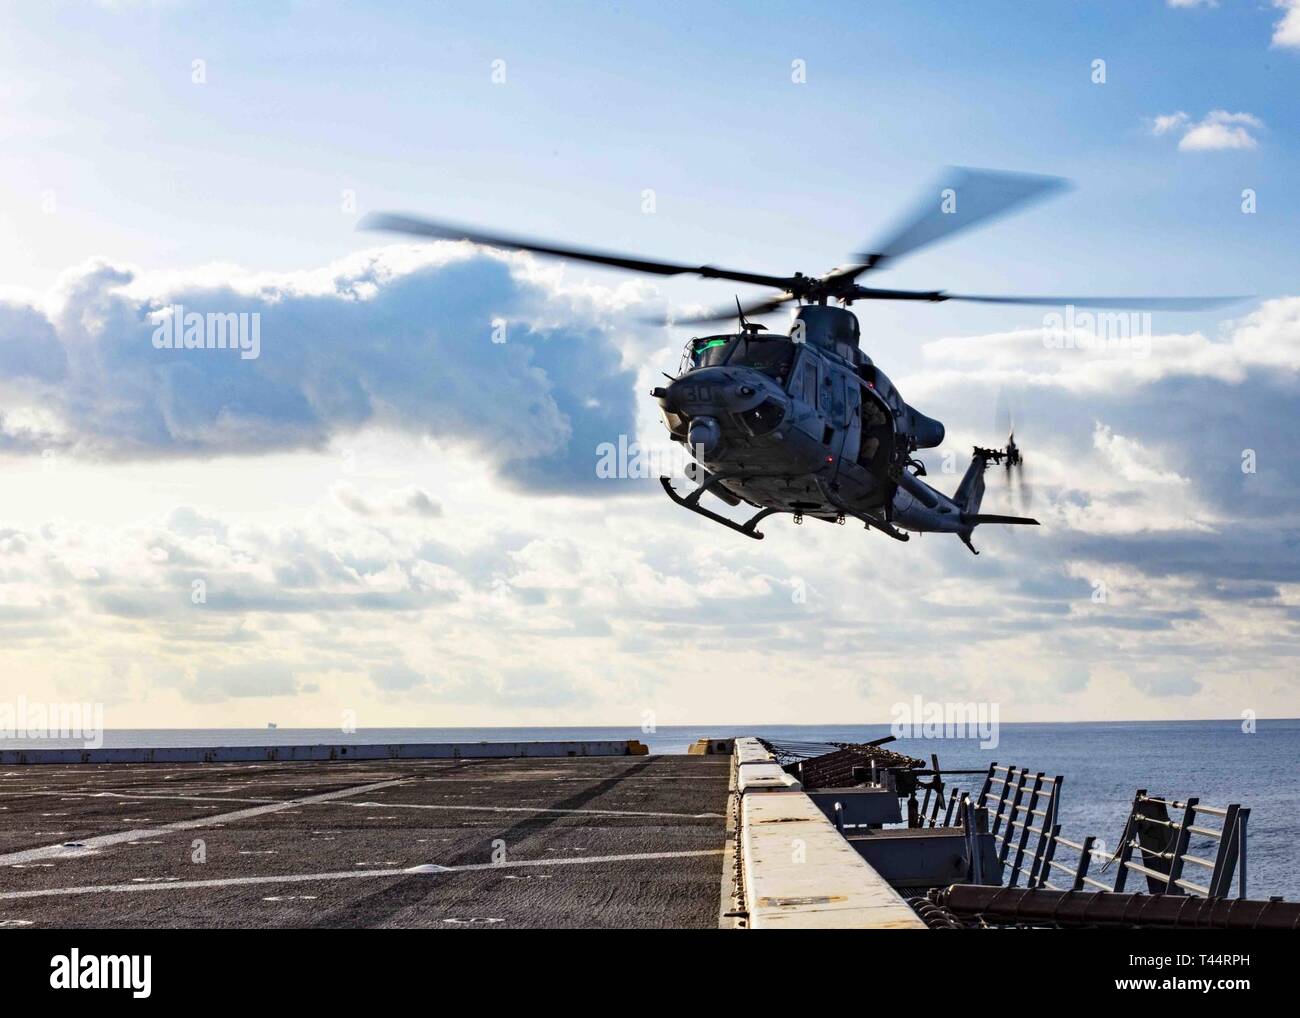 MEDITERRANEAN SEA (Feb. 21, 2019) A UH-1Y Huey helicopter assigned to the “Black Knights” of Marine Medium Tiltrotor Squadron (VMM) 264 (Reinforced) prepares to land on the flight deck of the San Antonio-class amphibious transport dock ship USS Arlington (LPD 24), Feb. 21, 2019. Arlington is on a scheduled deployment as part of the Kearsarge Amphibious Ready Group in support of maritime security operations, crisis response and theater security cooperation, while also providing a forward naval presence. Stock Photo